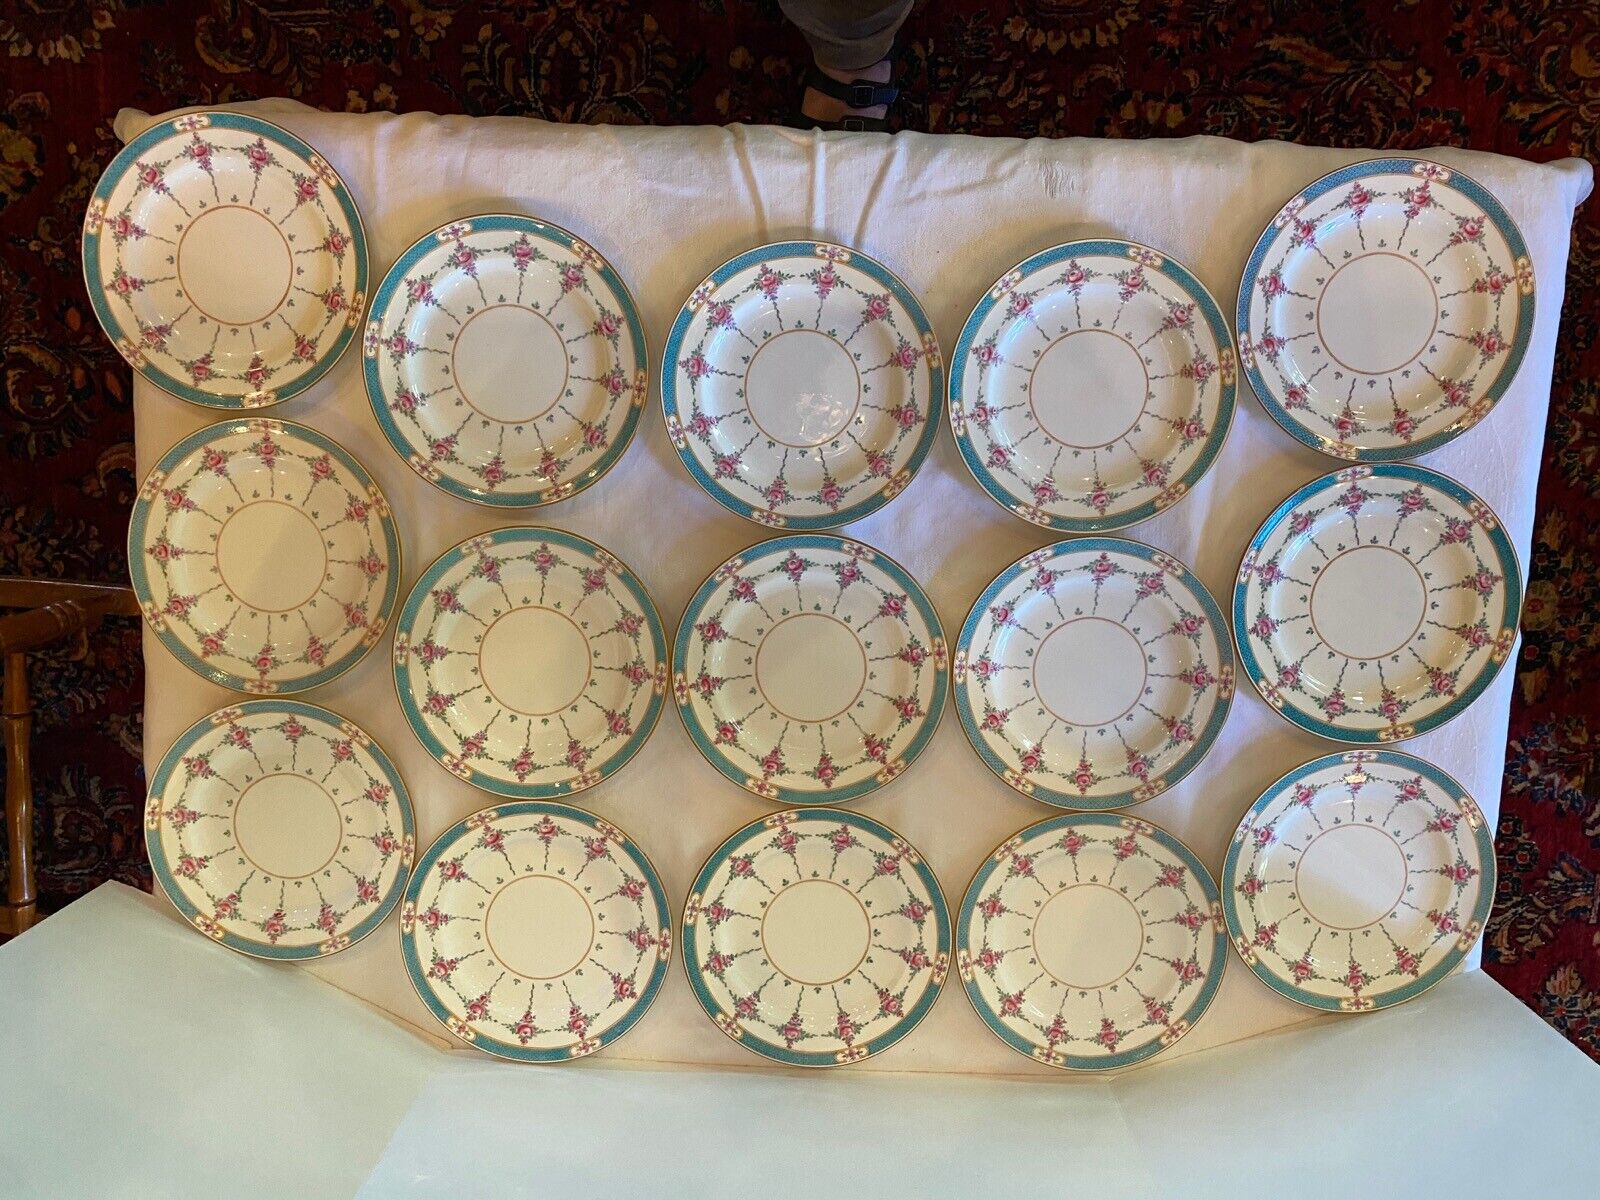 Antique China Minton Persian Rose Set of 15 Lunch Plates 9” England Mintons